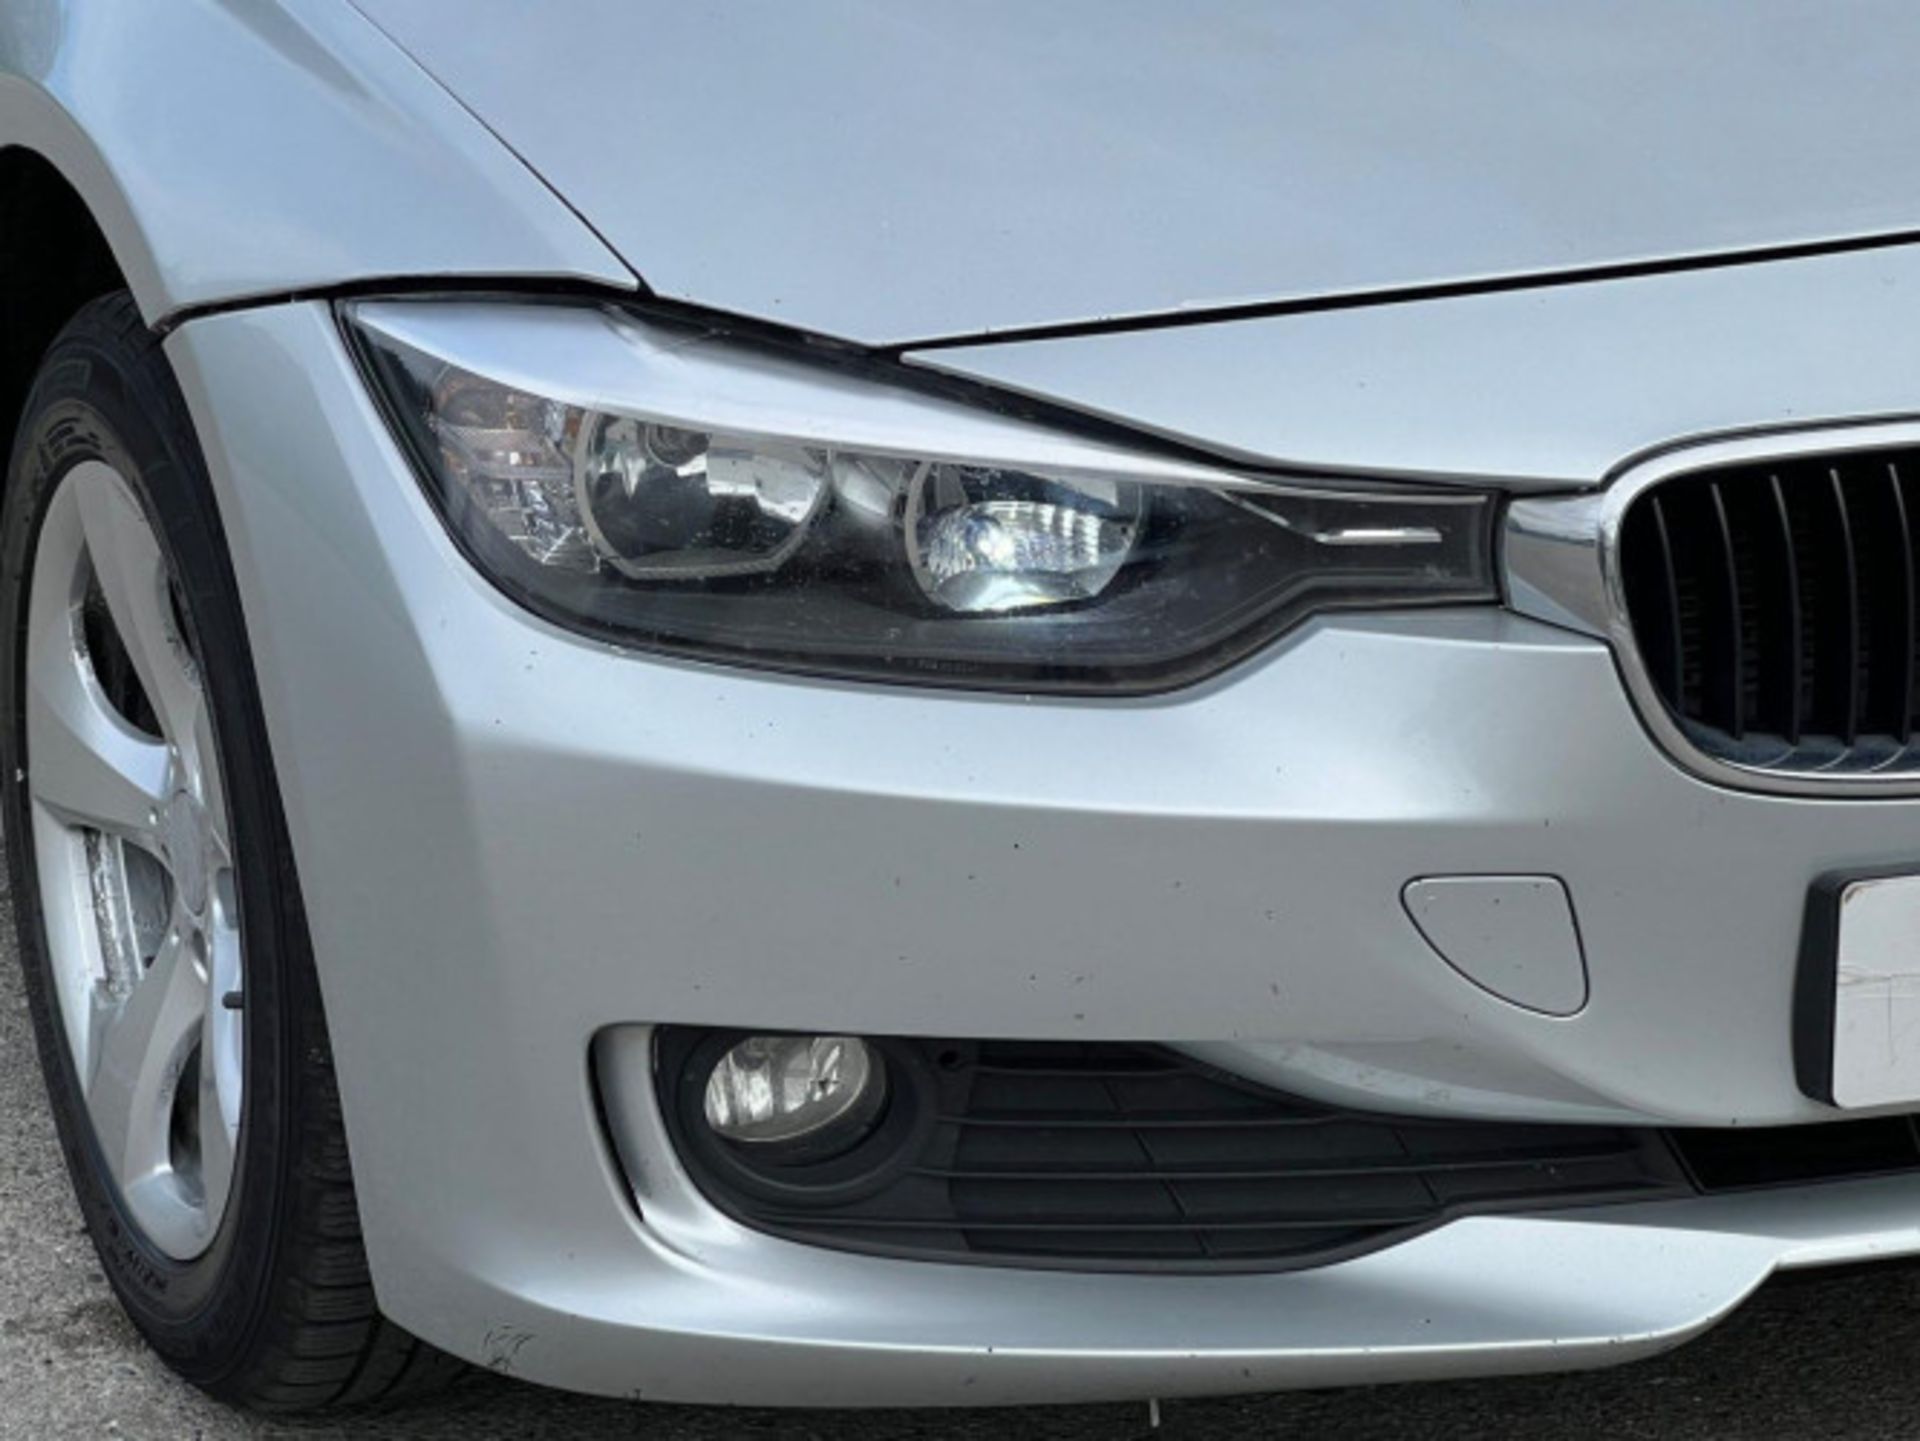 BMW 3 SERIES 2.0 DIESEL ED START STOP - A WELL-MAINTAINED GEM >>--NO VAT ON HAMMER--<< - Image 205 of 229